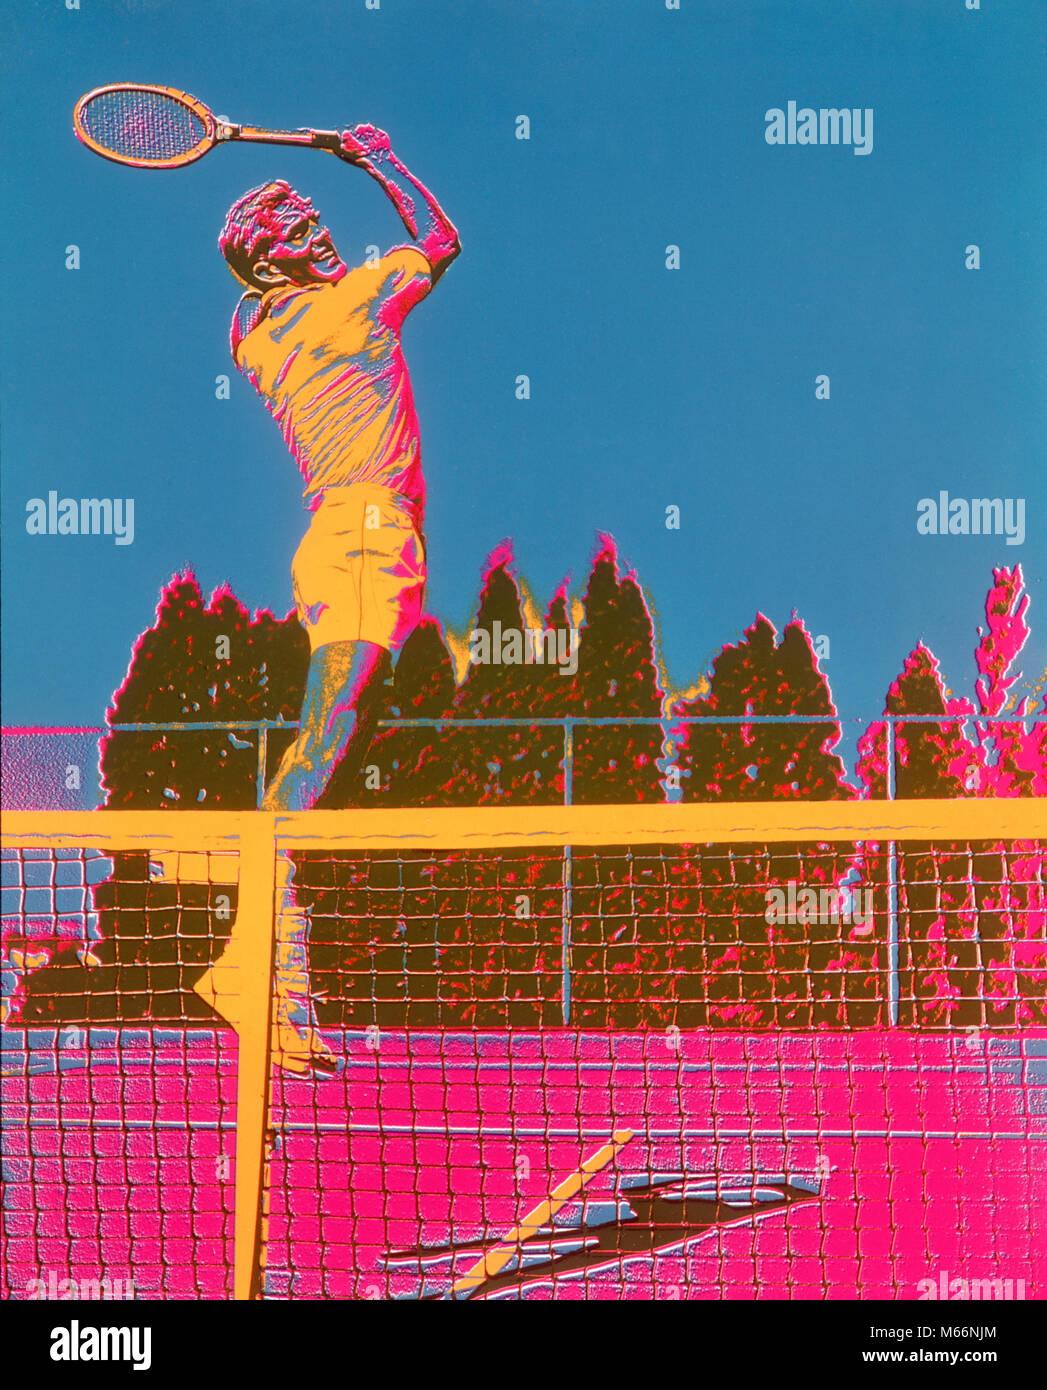 1970s 1960s POSTERIZED SPECIAL EFFECT COLORFUL MAN TENNIS PLAYER BY NET JUMPING UP FOR SHOT ACE LOB - kt1783 HAR001 HARS FULL-LENGTH PHYSICAL FITNESS GROWN-UP ATHLETIC NOSTALGIA 20-25 YEARS COLORFUL ACTIVITY PHYSICAL STRENGTHENING WEIGHT LOSS WELLNESS AEROBIC LEAP LEISURE STRENGTH SELF ESTEEM RACQUET EXCITEMENT NOBODY POWERFUL RECREATION SPECIAL EFFECT 18-19 YEARS MENTAL HEALTH HONING SKILLS RACKETS CONCEPTUAL GOOD HEALTH TENNIS RACKET TENNIS RACKETS ATHLETES FLEXIBILITY MUSCLES RACQUETS RECREATION TENNIS CARDIOVASCULAR ENHANCE MALES TECHNIQUE YOUNG ADULT MAN ACE CAUCASIAN ETHNICITY Stock Photo